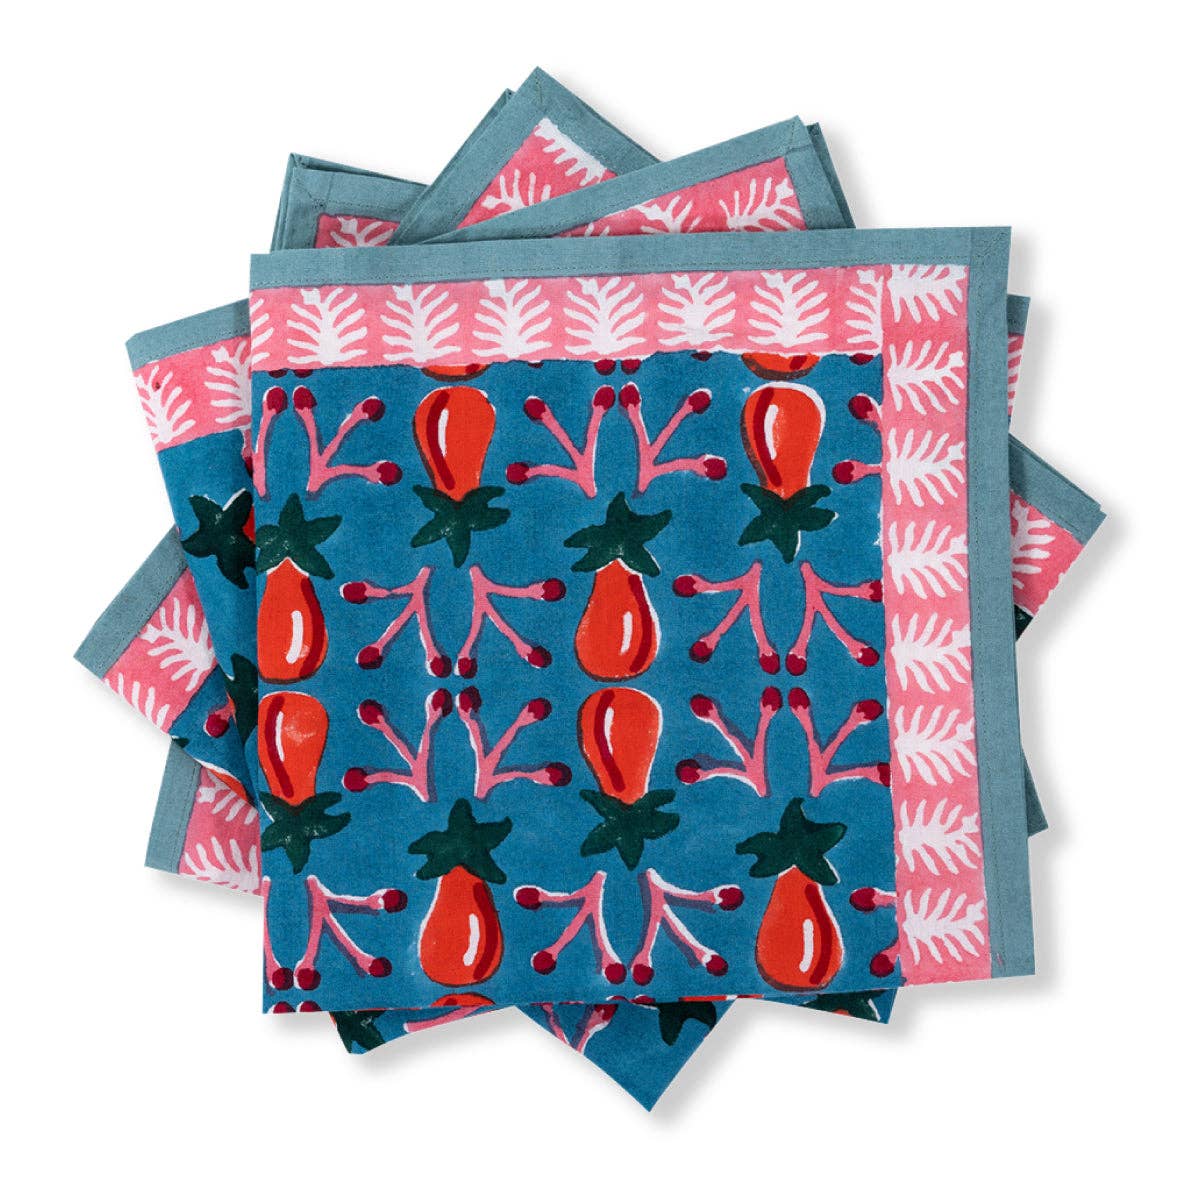 The Every Space 100% cotton napkins in red and blue Wilshire blockprint by Furbish studio, handmade in India